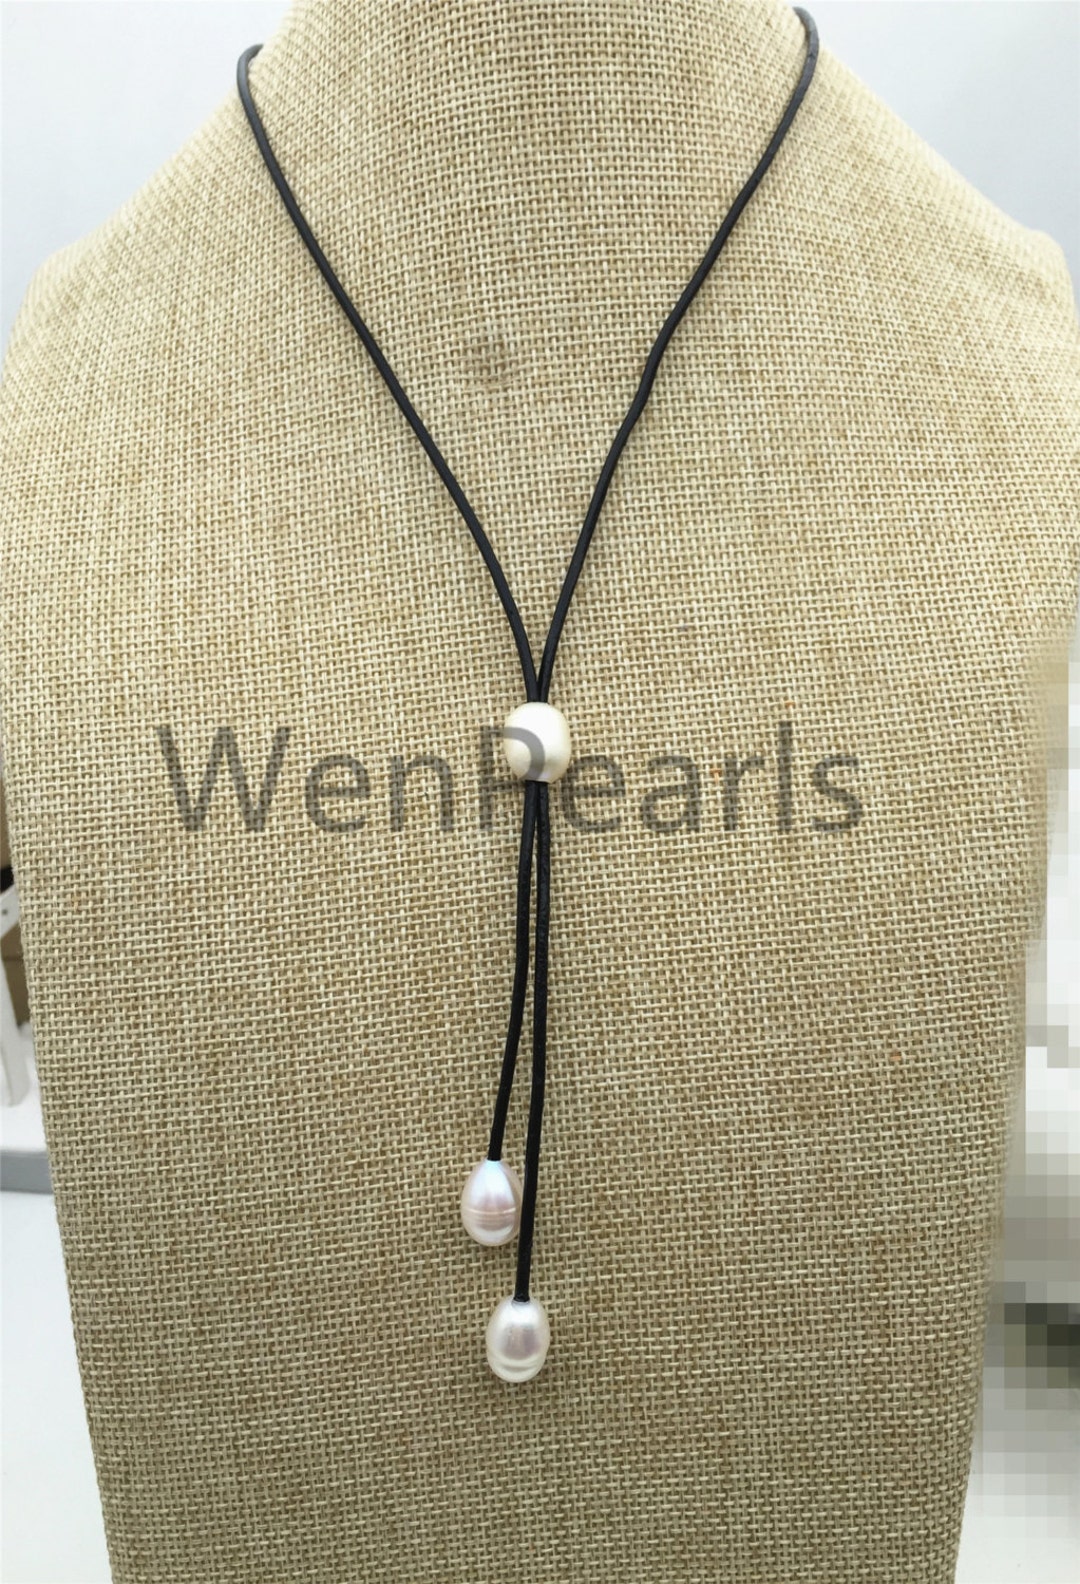 Freshwater Pearl and Leather Lariat Necklace, Light Brwon Leather Pearl ...